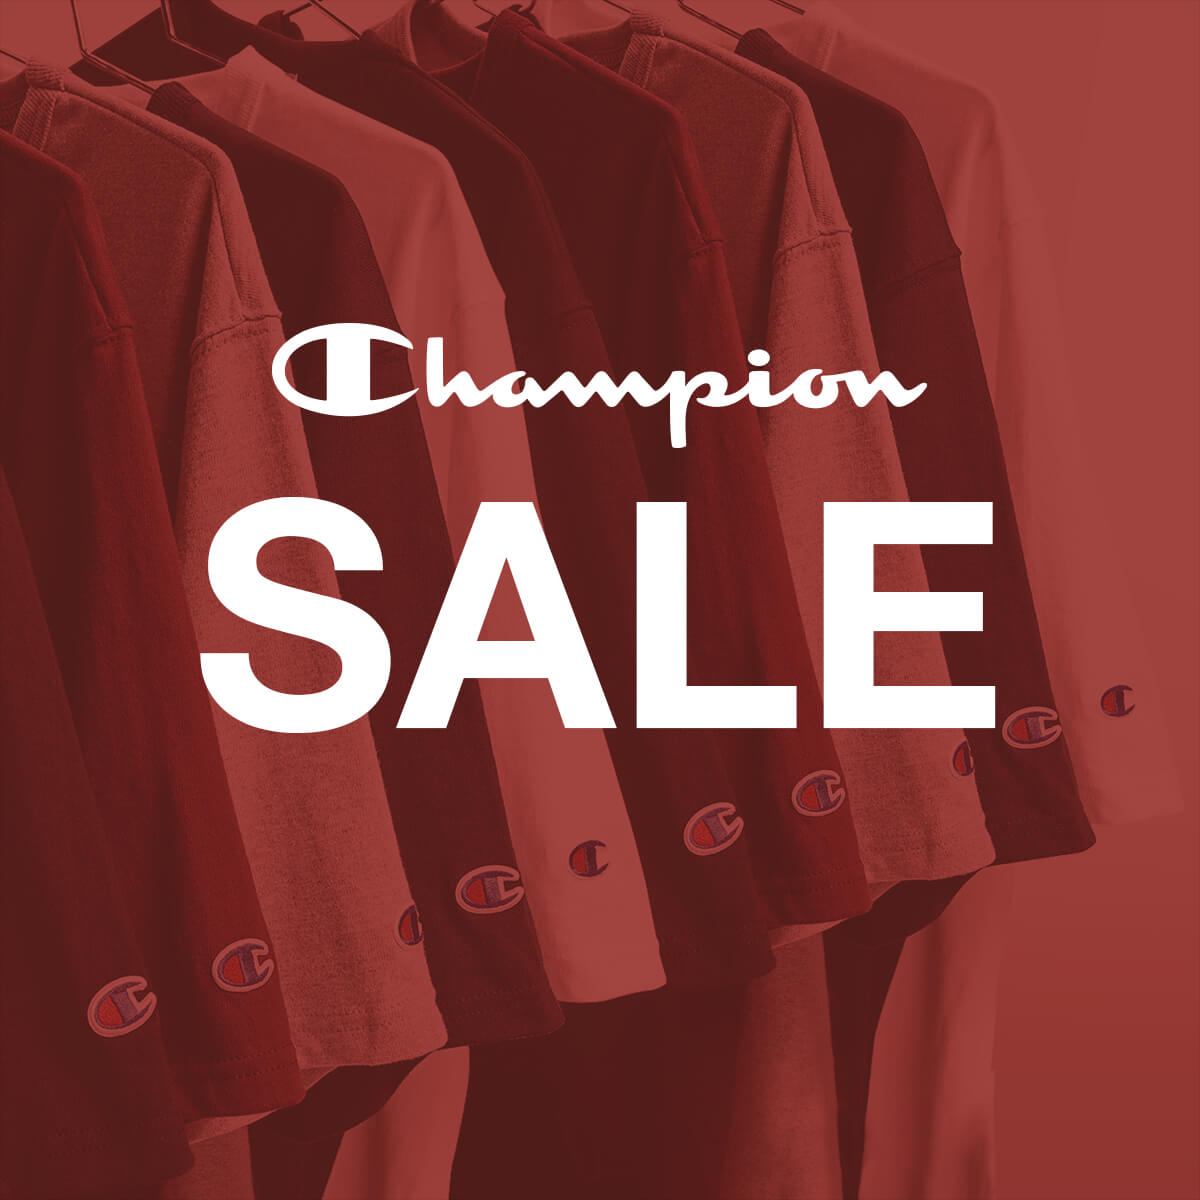 CHAMPION SALE - SHOP NOW AND GET A DEAL